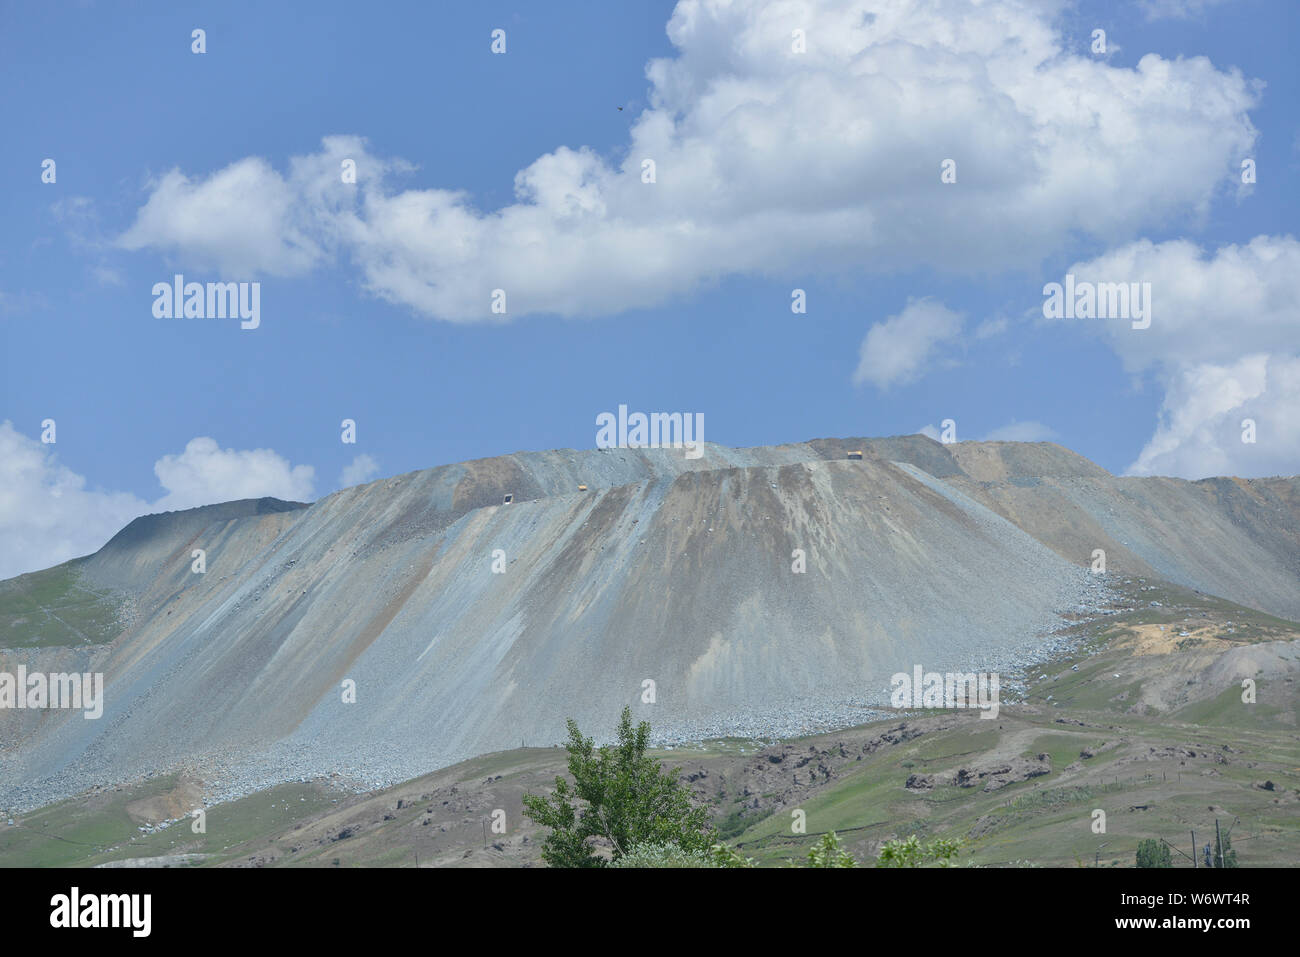 Republic of Armenia. 12th July, 2019. Mining operations and impact in Armenia near the border with the Artsakh Republic have caused serious concerns about environmental impacts from mining gold and other minerals. Residents in some areas have blocked mining operations by occupying some sites. Leakage from tailing dams may pollute Lake Sevan and even the Ararat Valley where agricultural irrigation water from the lake may contaminate farms. Credit: Kenneth Martin/ZUMA Wire/Alamy Live News Stock Photo